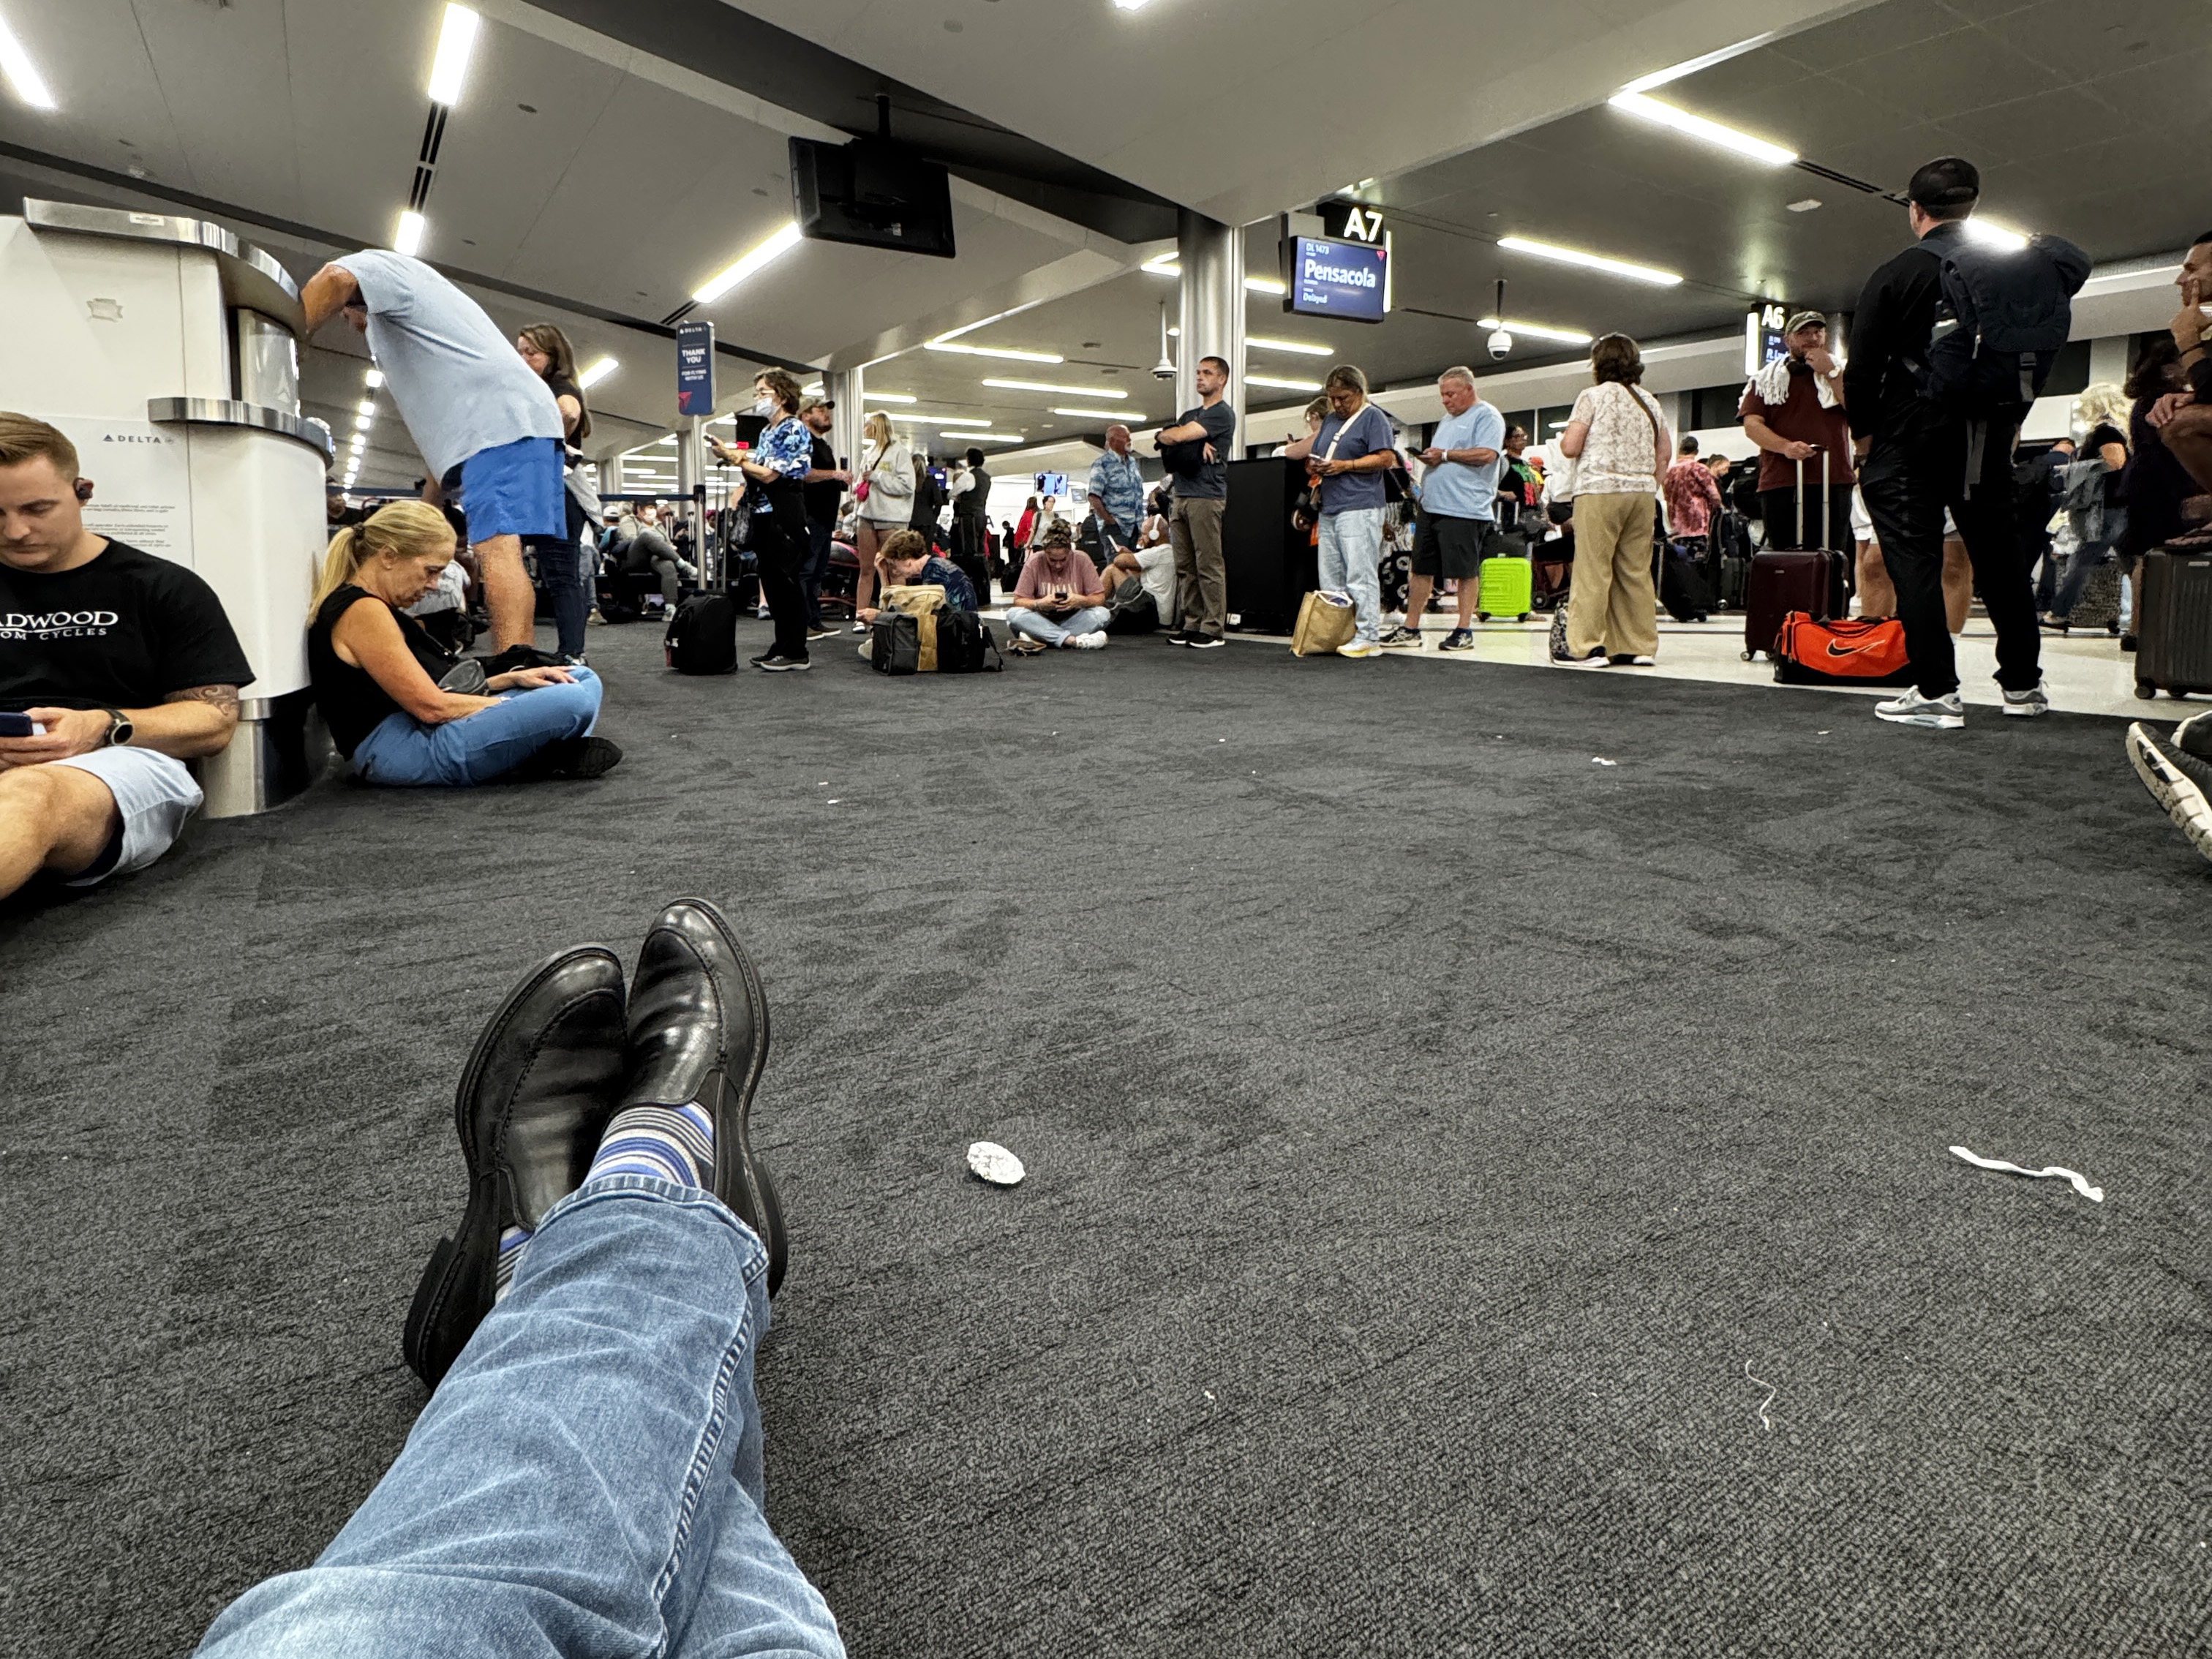 The scene from Gate A7 at Atlanta Hartsfield-Jackson International Airport late in the evening of July 21, 2024.